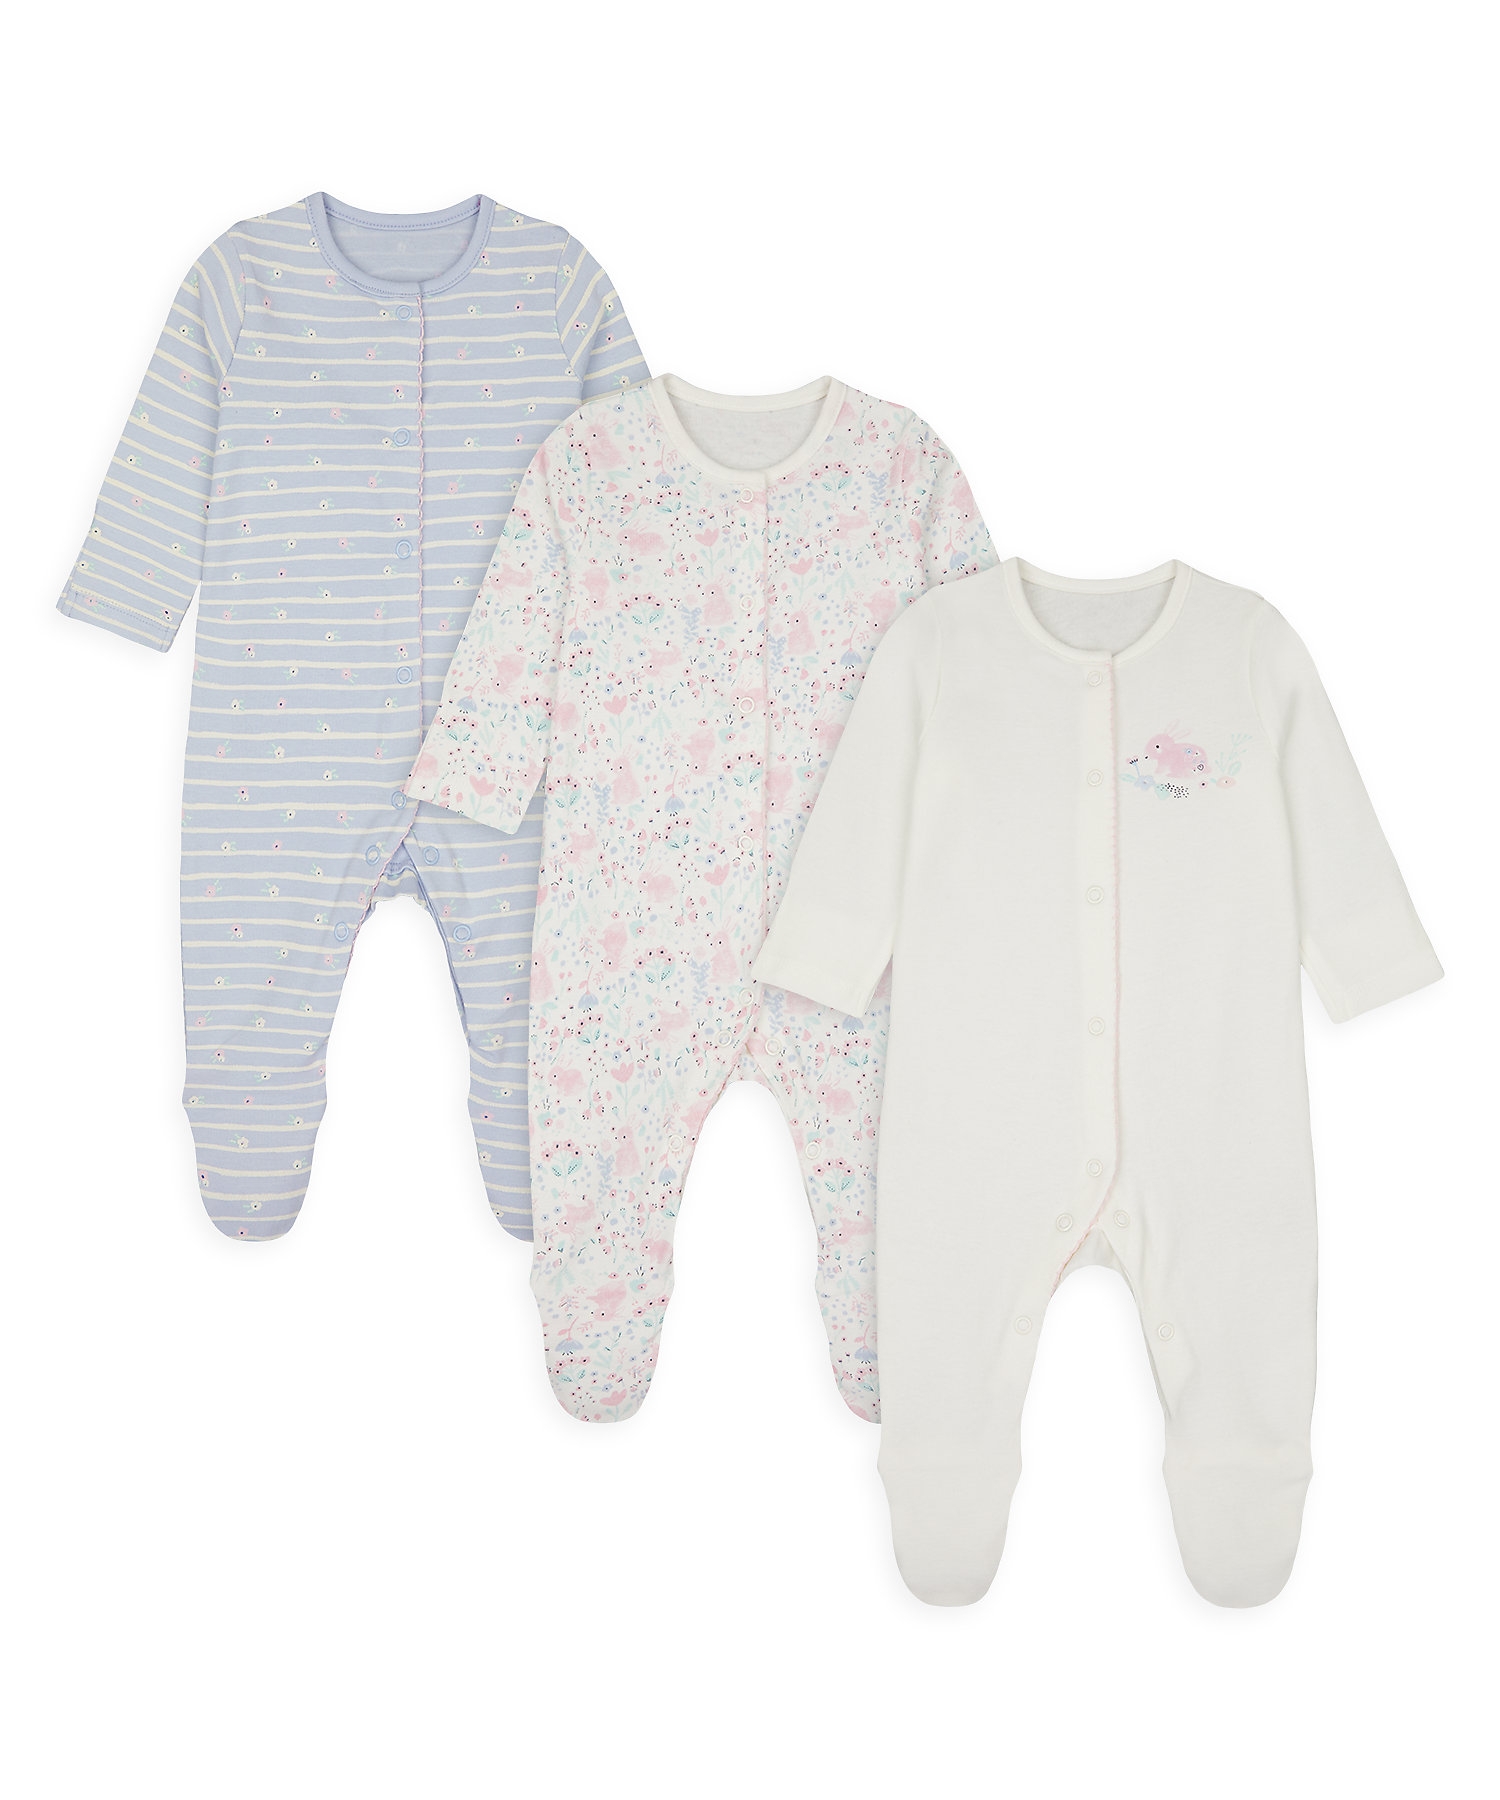 Girls Full Sleeves Sleepsuit Striped And Bunny Print - Pack Of 3 - Multicolor